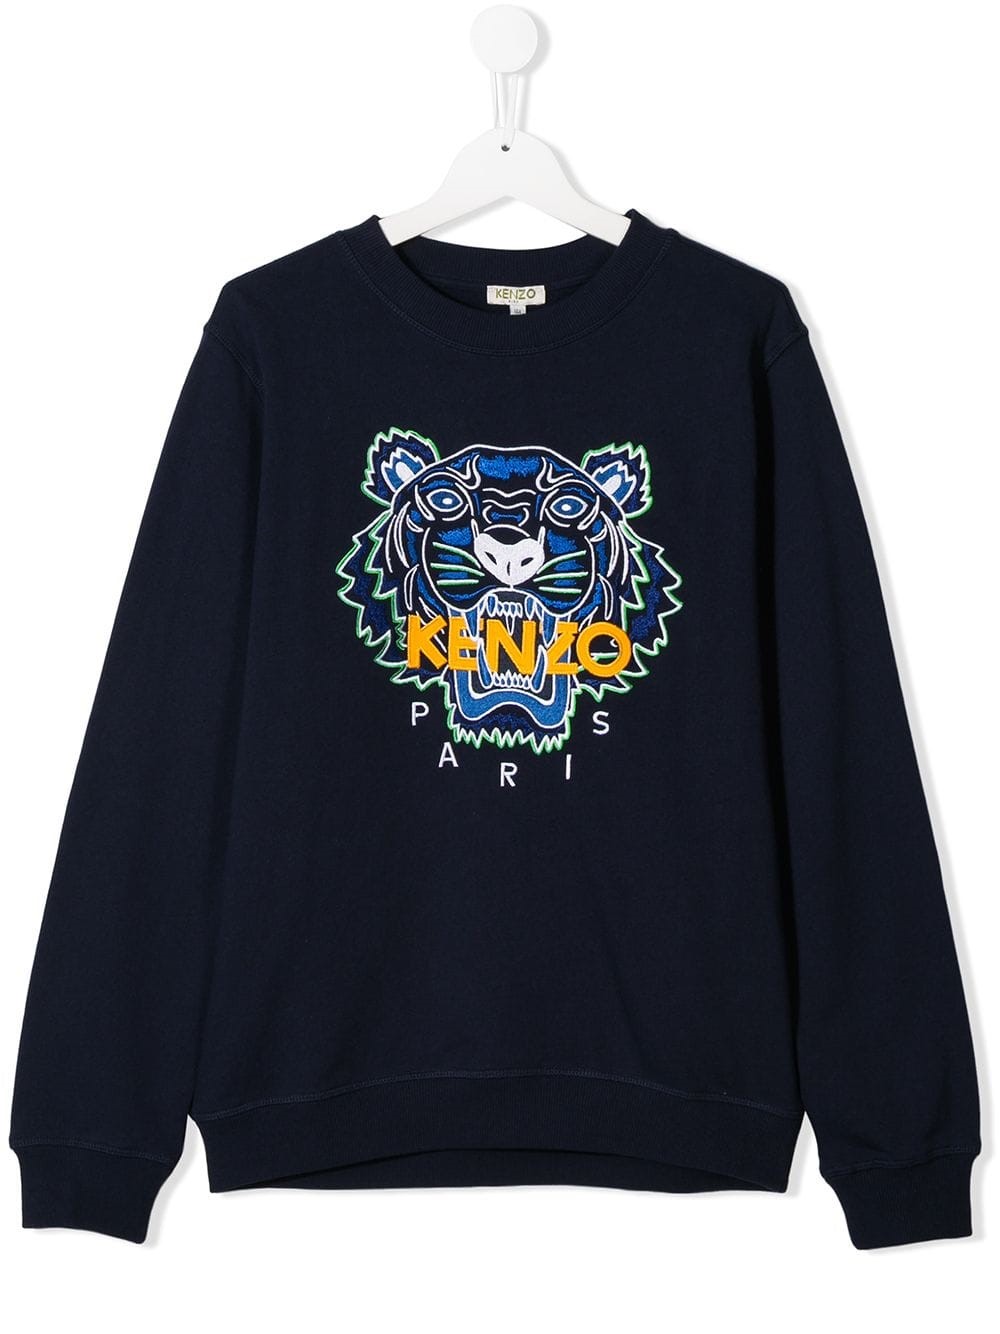 kenzo kids TIGER JB B2 SWEATER 14Y available on montiboutique.com 